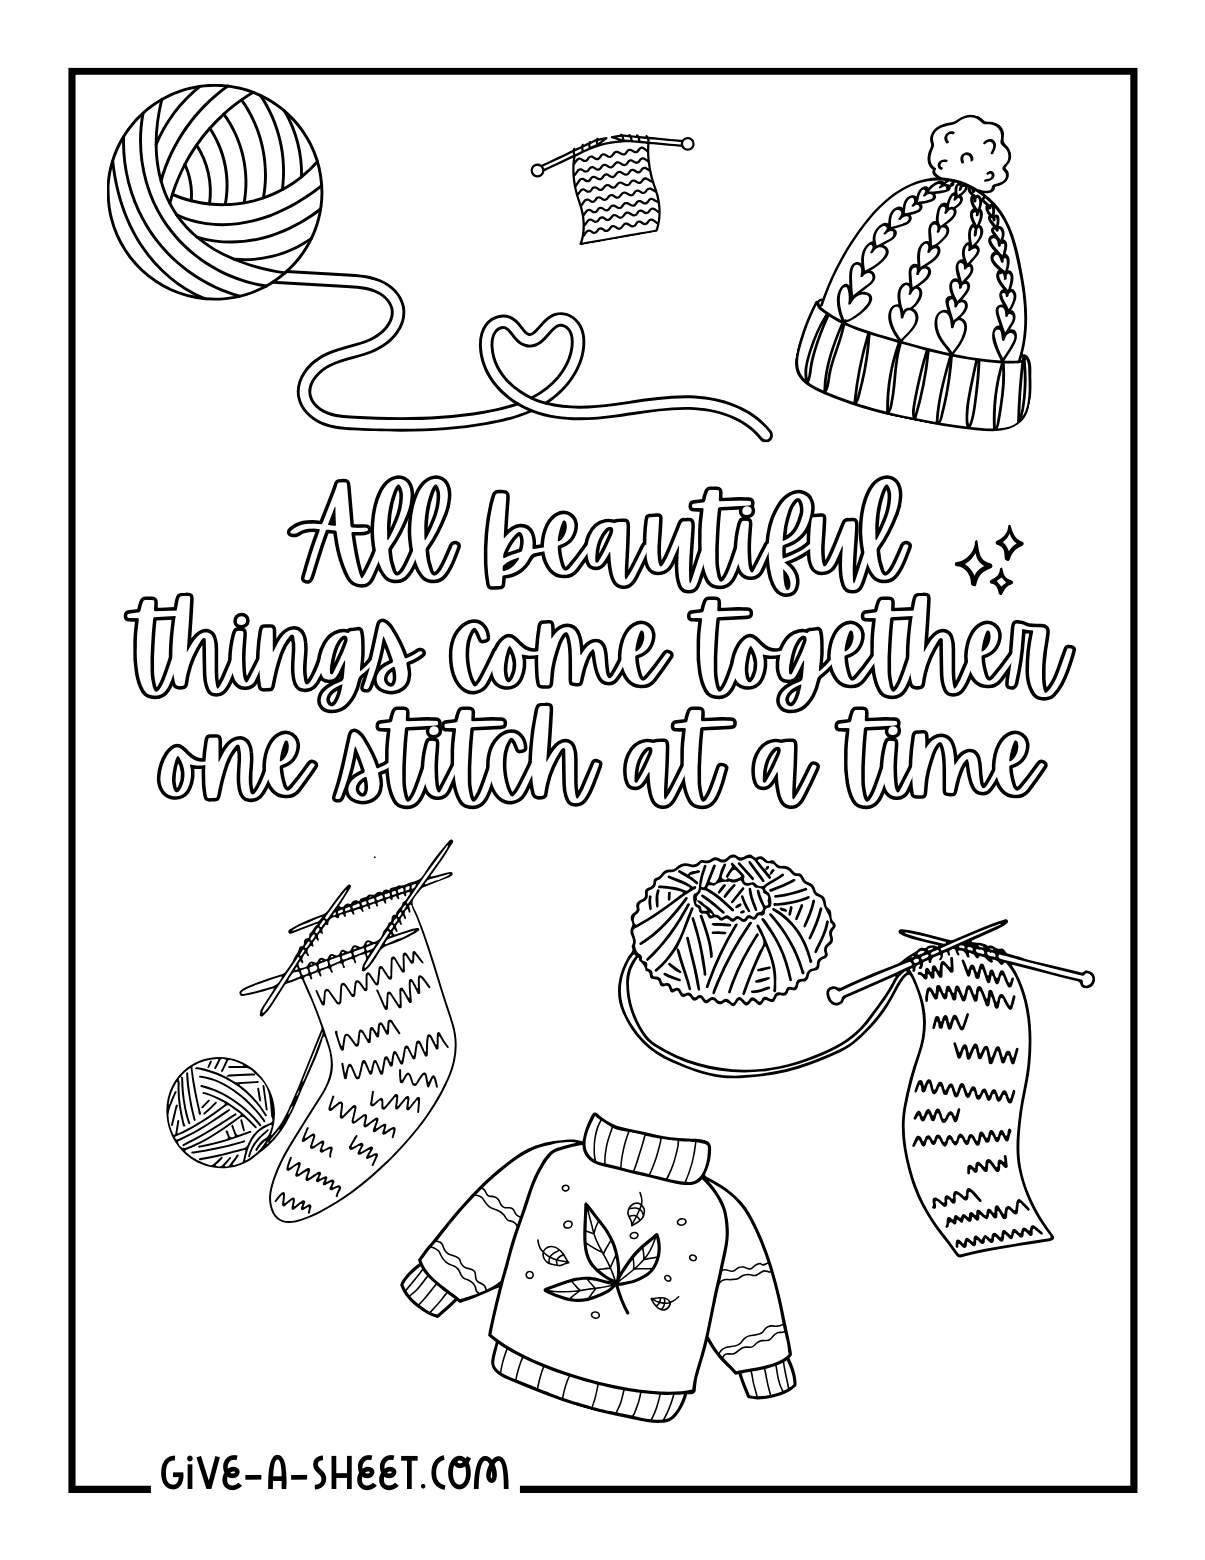 Knit projects scarf, beanie and sweater coloring page.